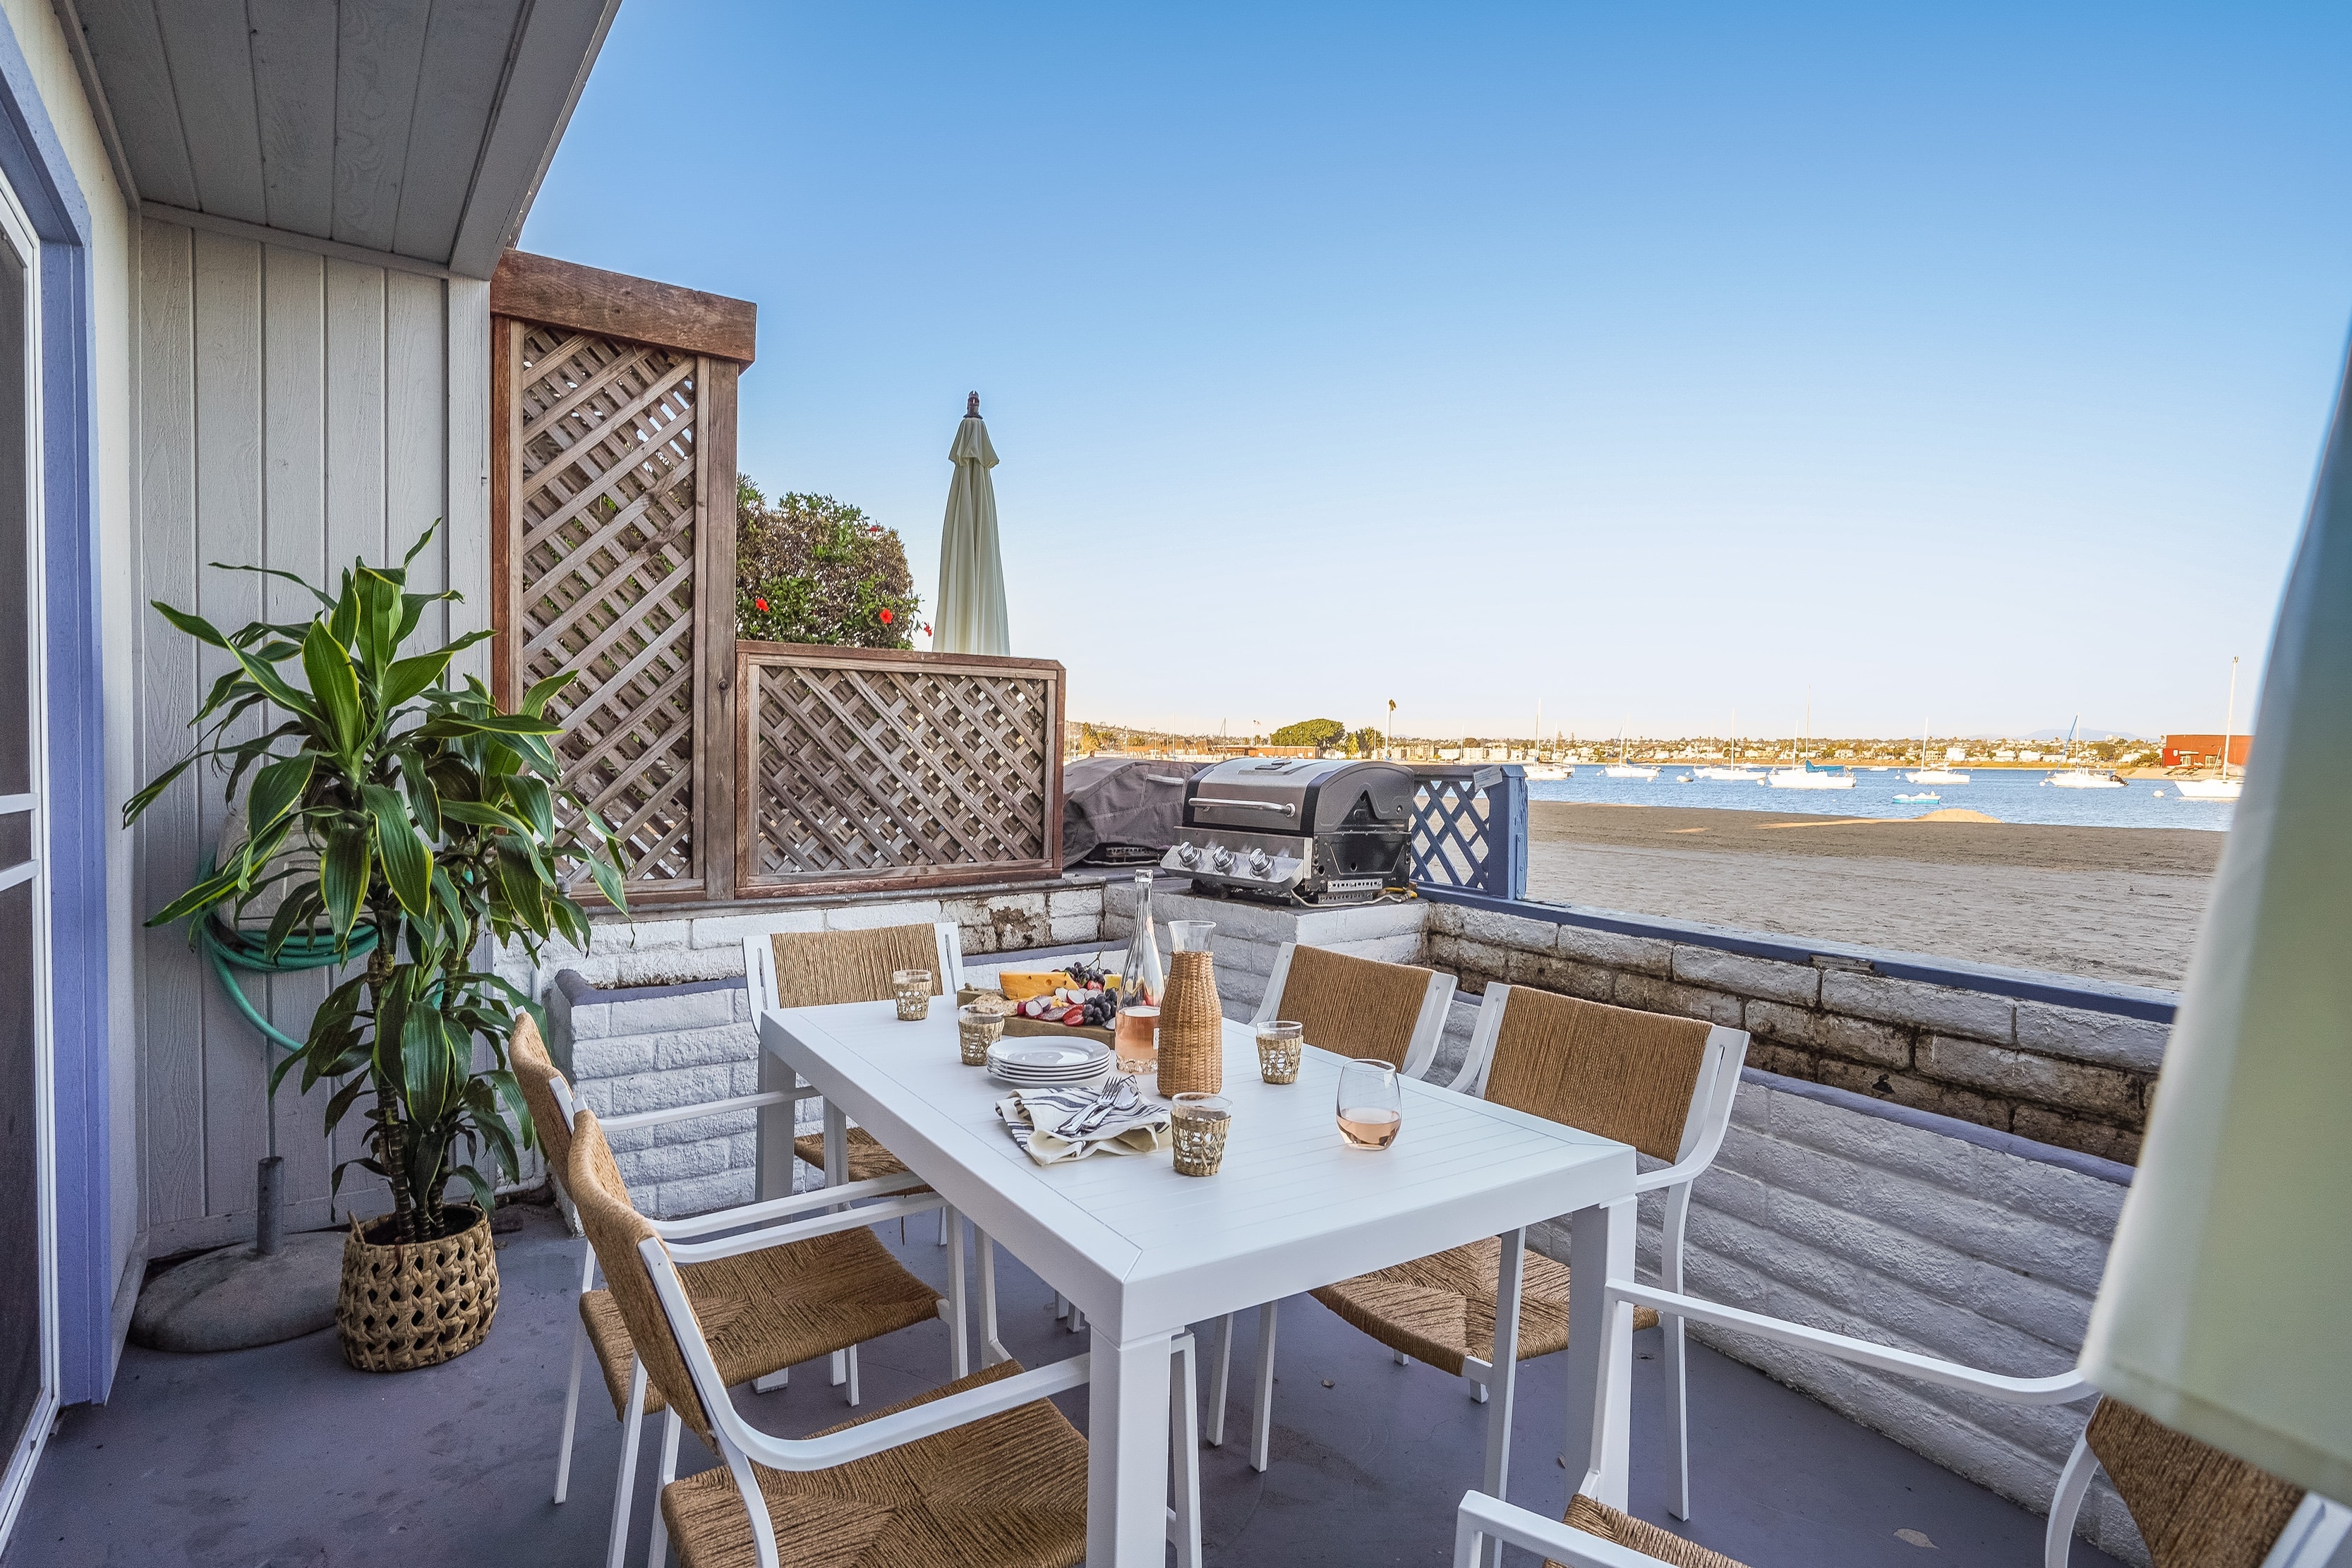 Patio right on the bay-side beach!